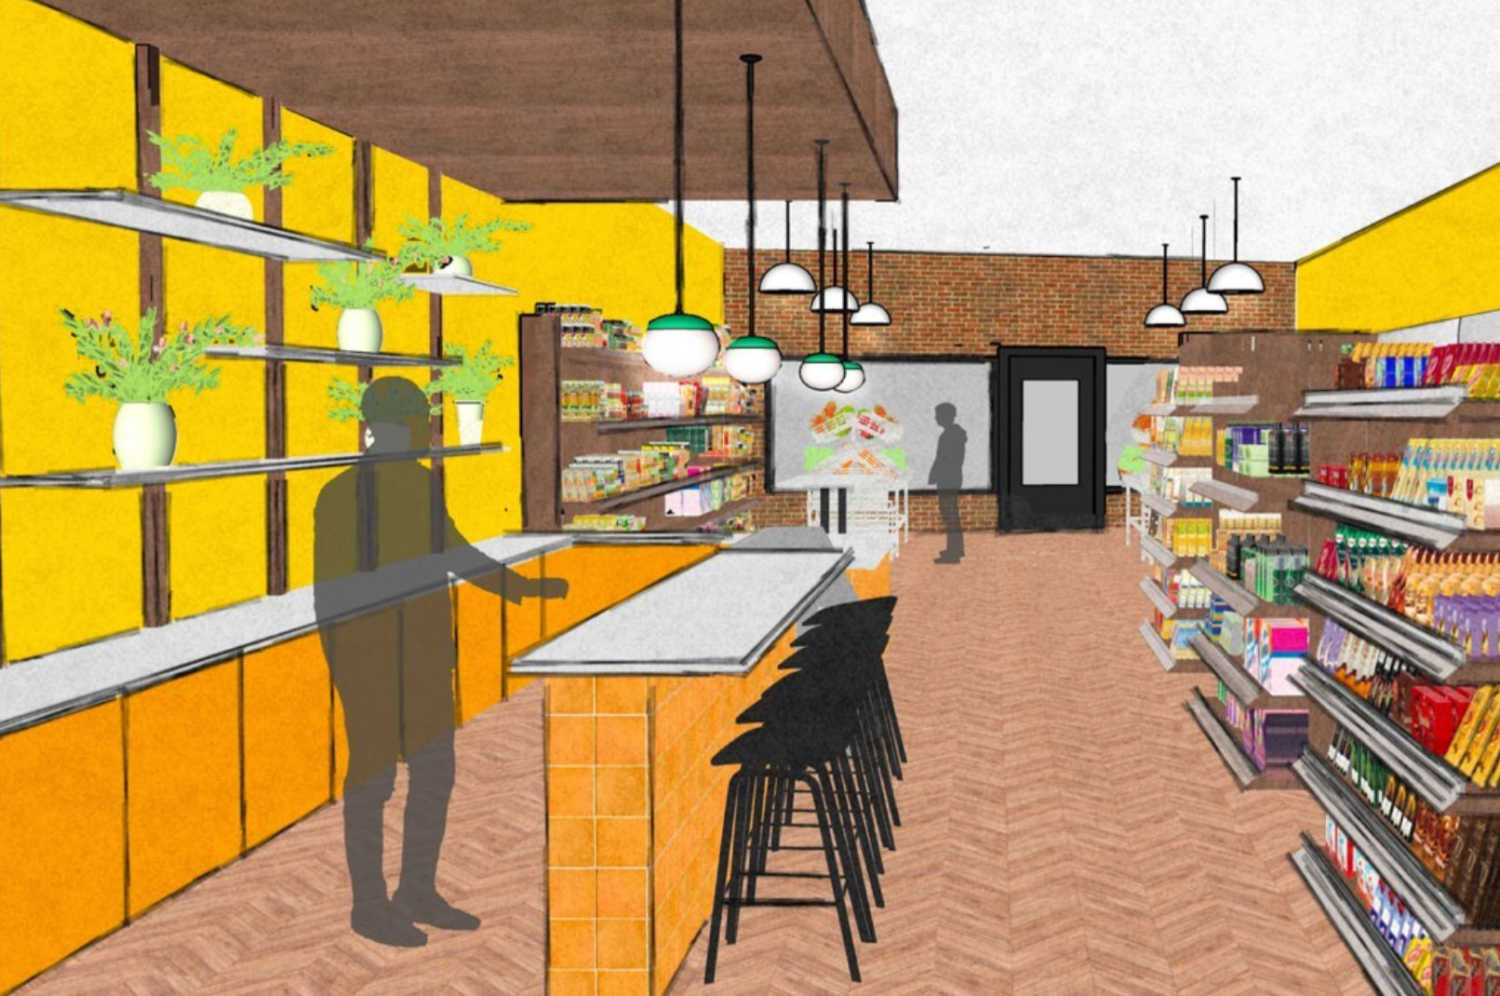 Pimlico Market and Cafe designs by the Neighborhood Design Center creates employment food opportunities and promotes healthy eating.